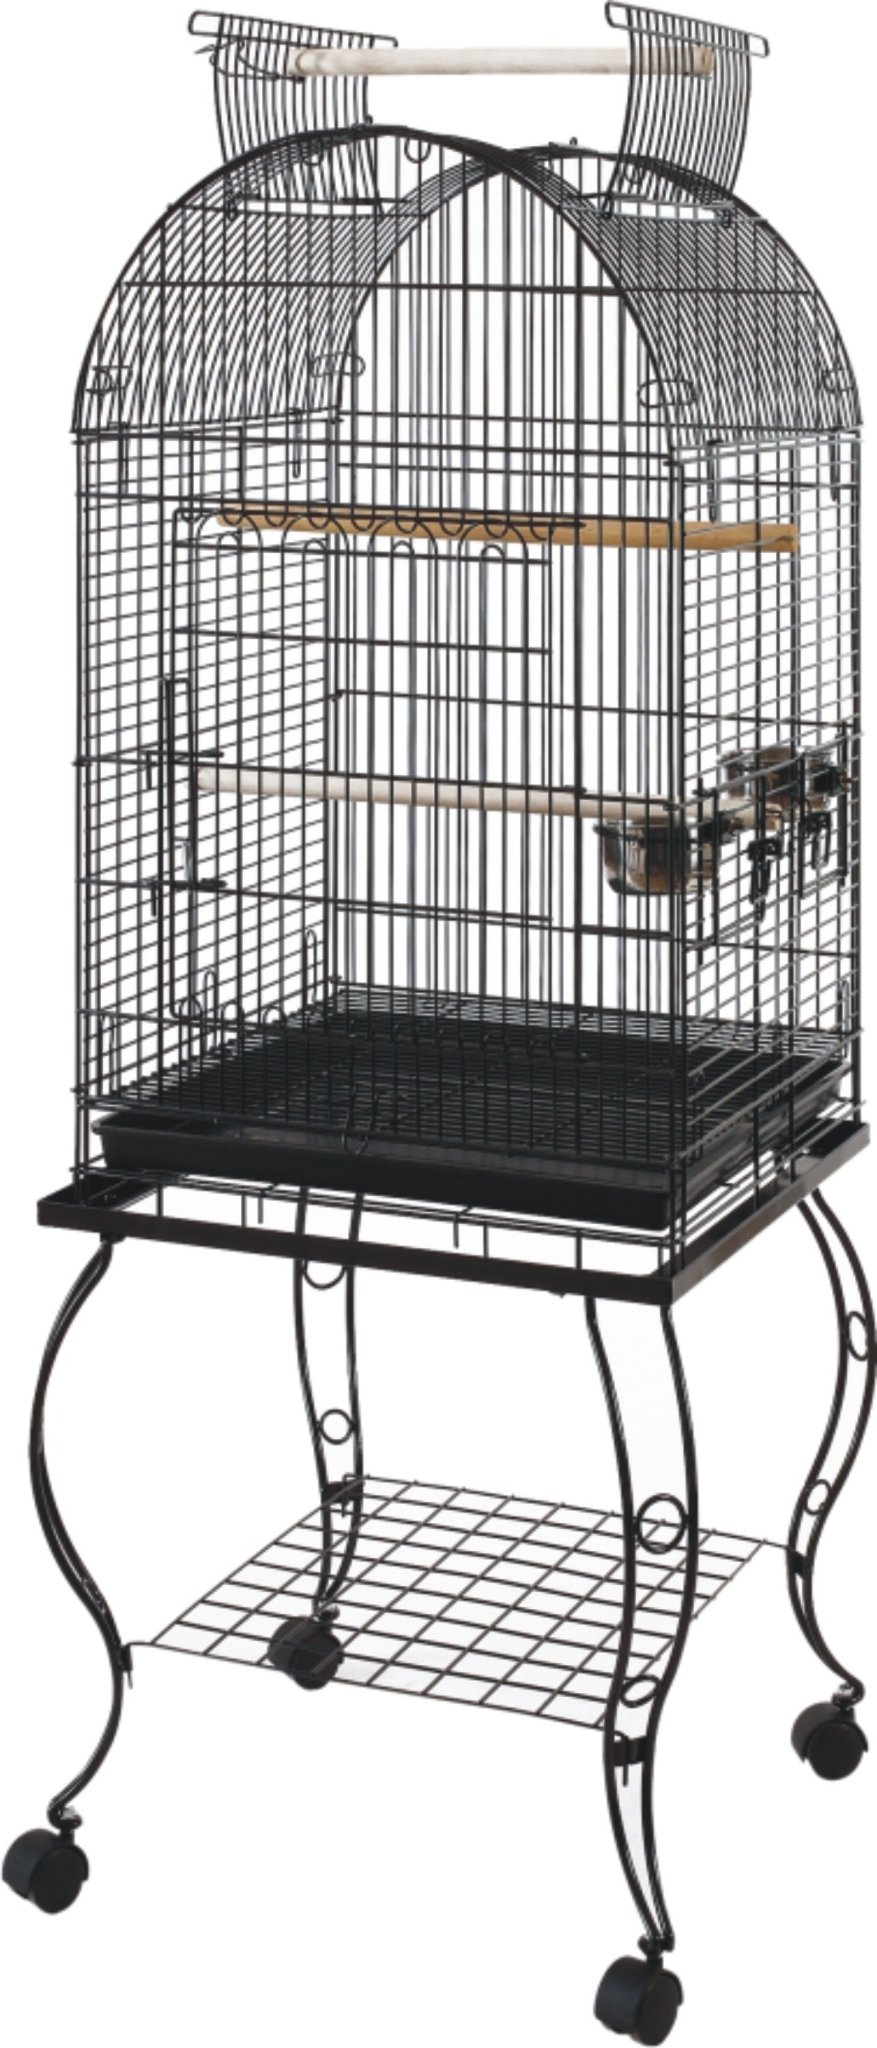 Bono Fido Parrot Cage 45701 With Stand Black - Woonona Petfood & Produce